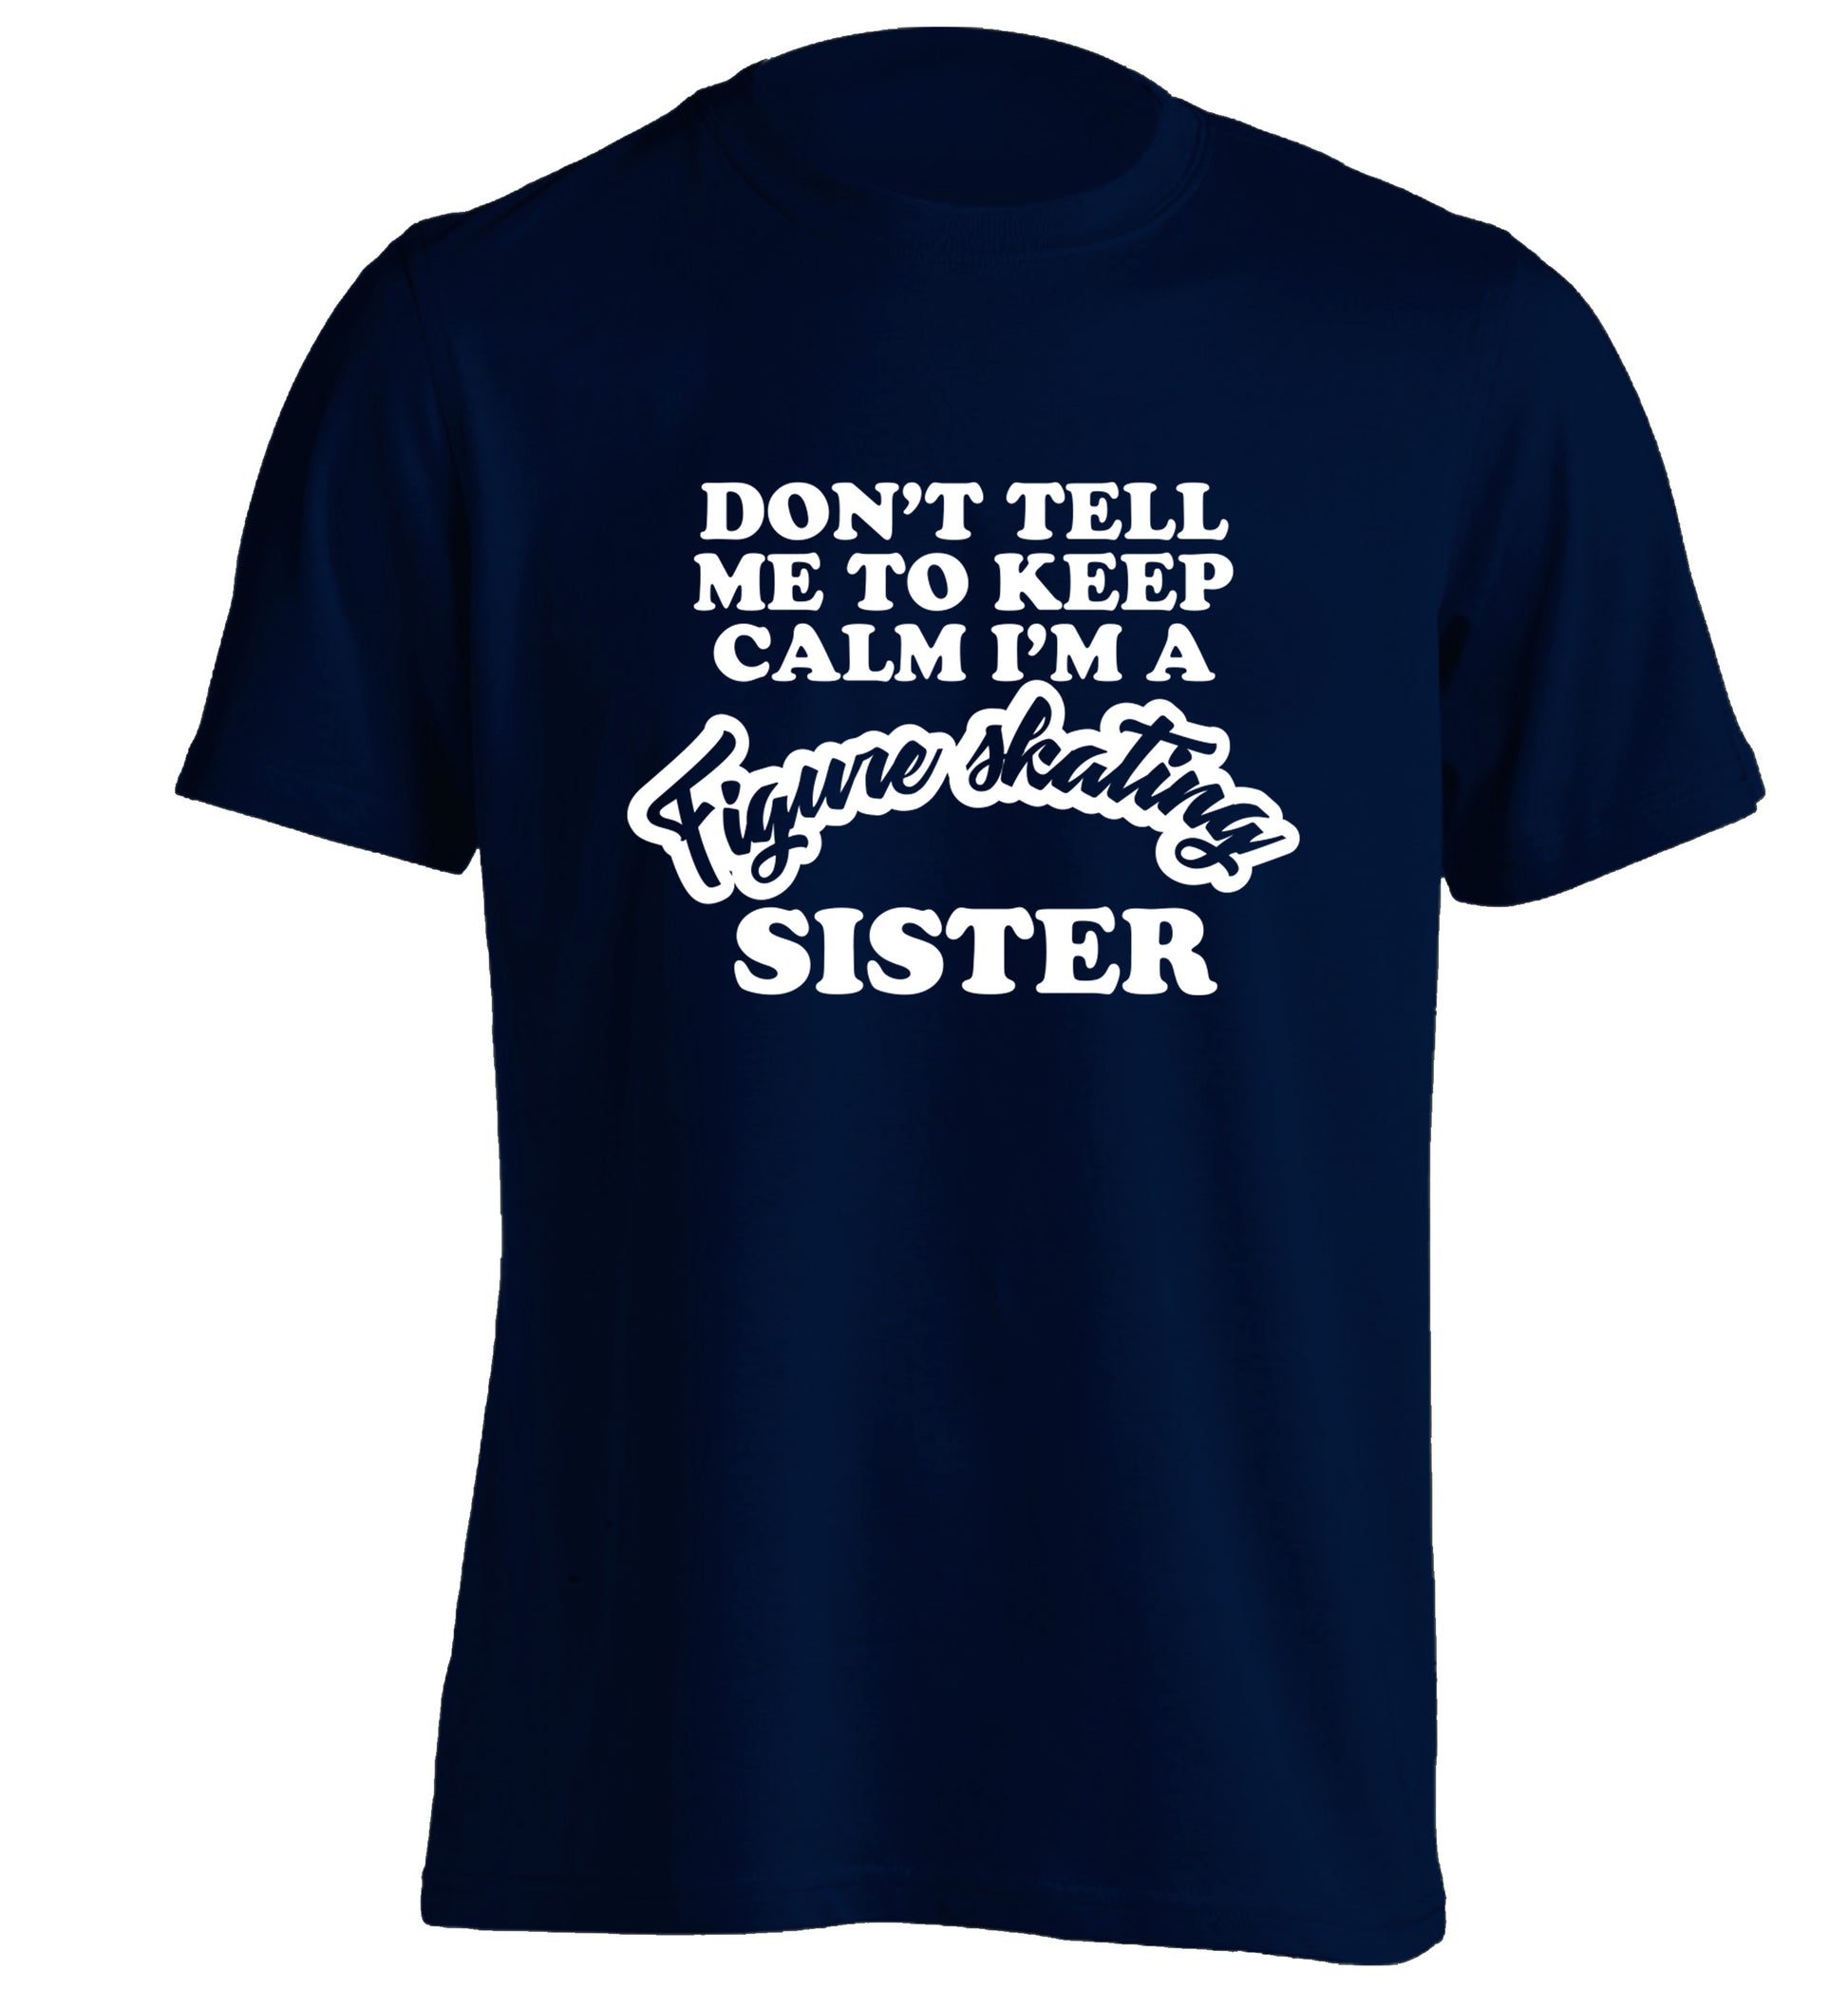 Don't tell me to keep calm I'm a figure skating sister adults unisexnavy Tshirt 2XL